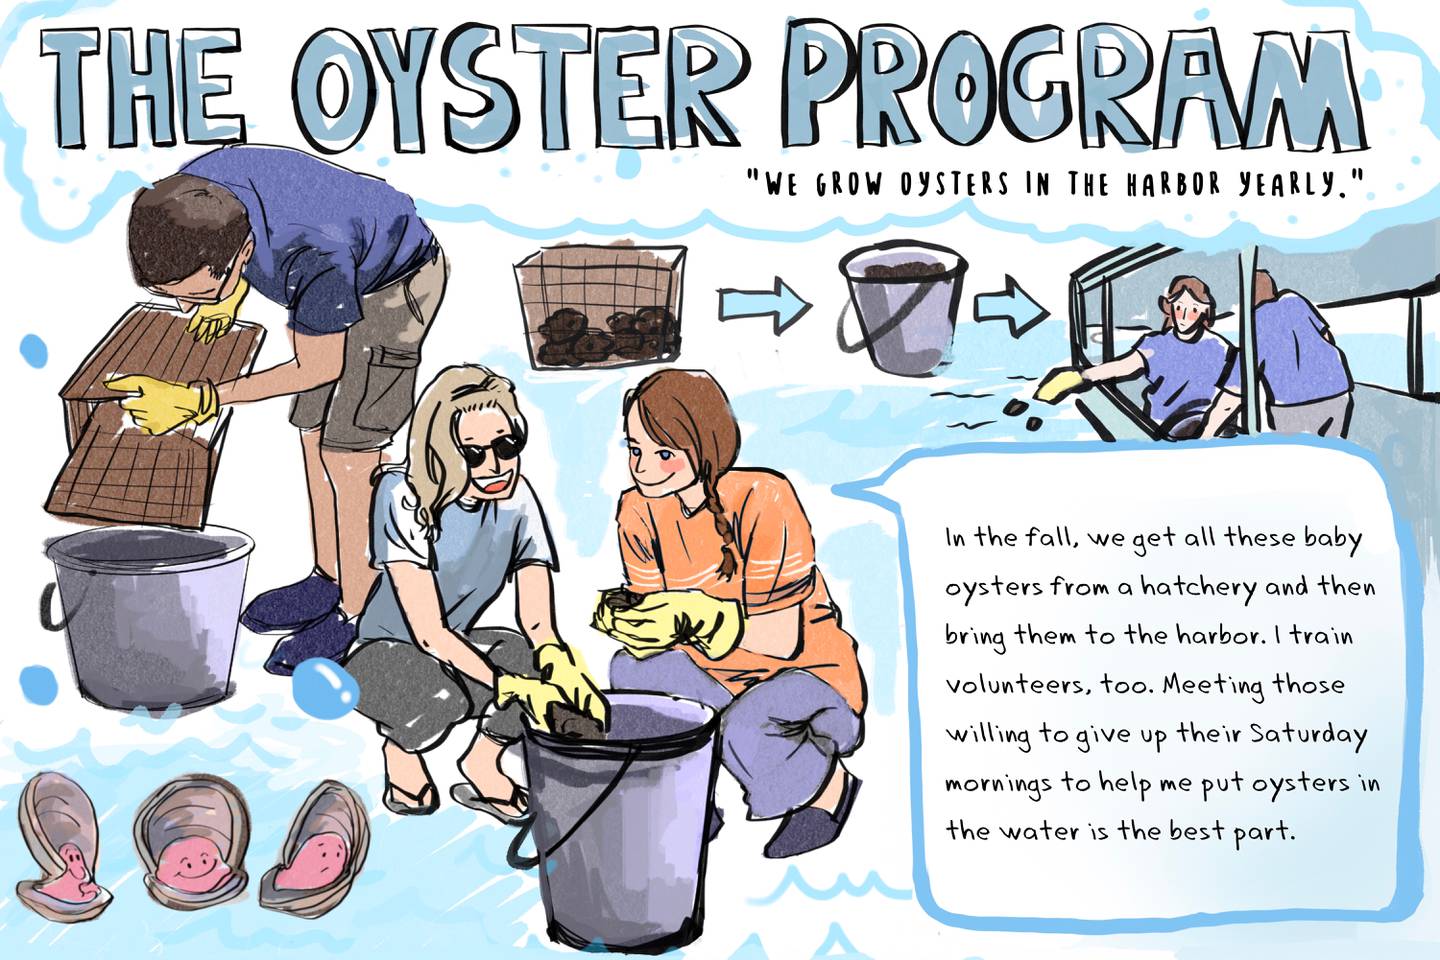 The Oyster Program. We grow oysters in the harbor yearly. In the fall, we get all these baby oysters from a hatchery and then bring them to the harbor. I train volunteers, too. Meeting those willing to give up their Saturday mornings to help me put oysters in the water is the best part.